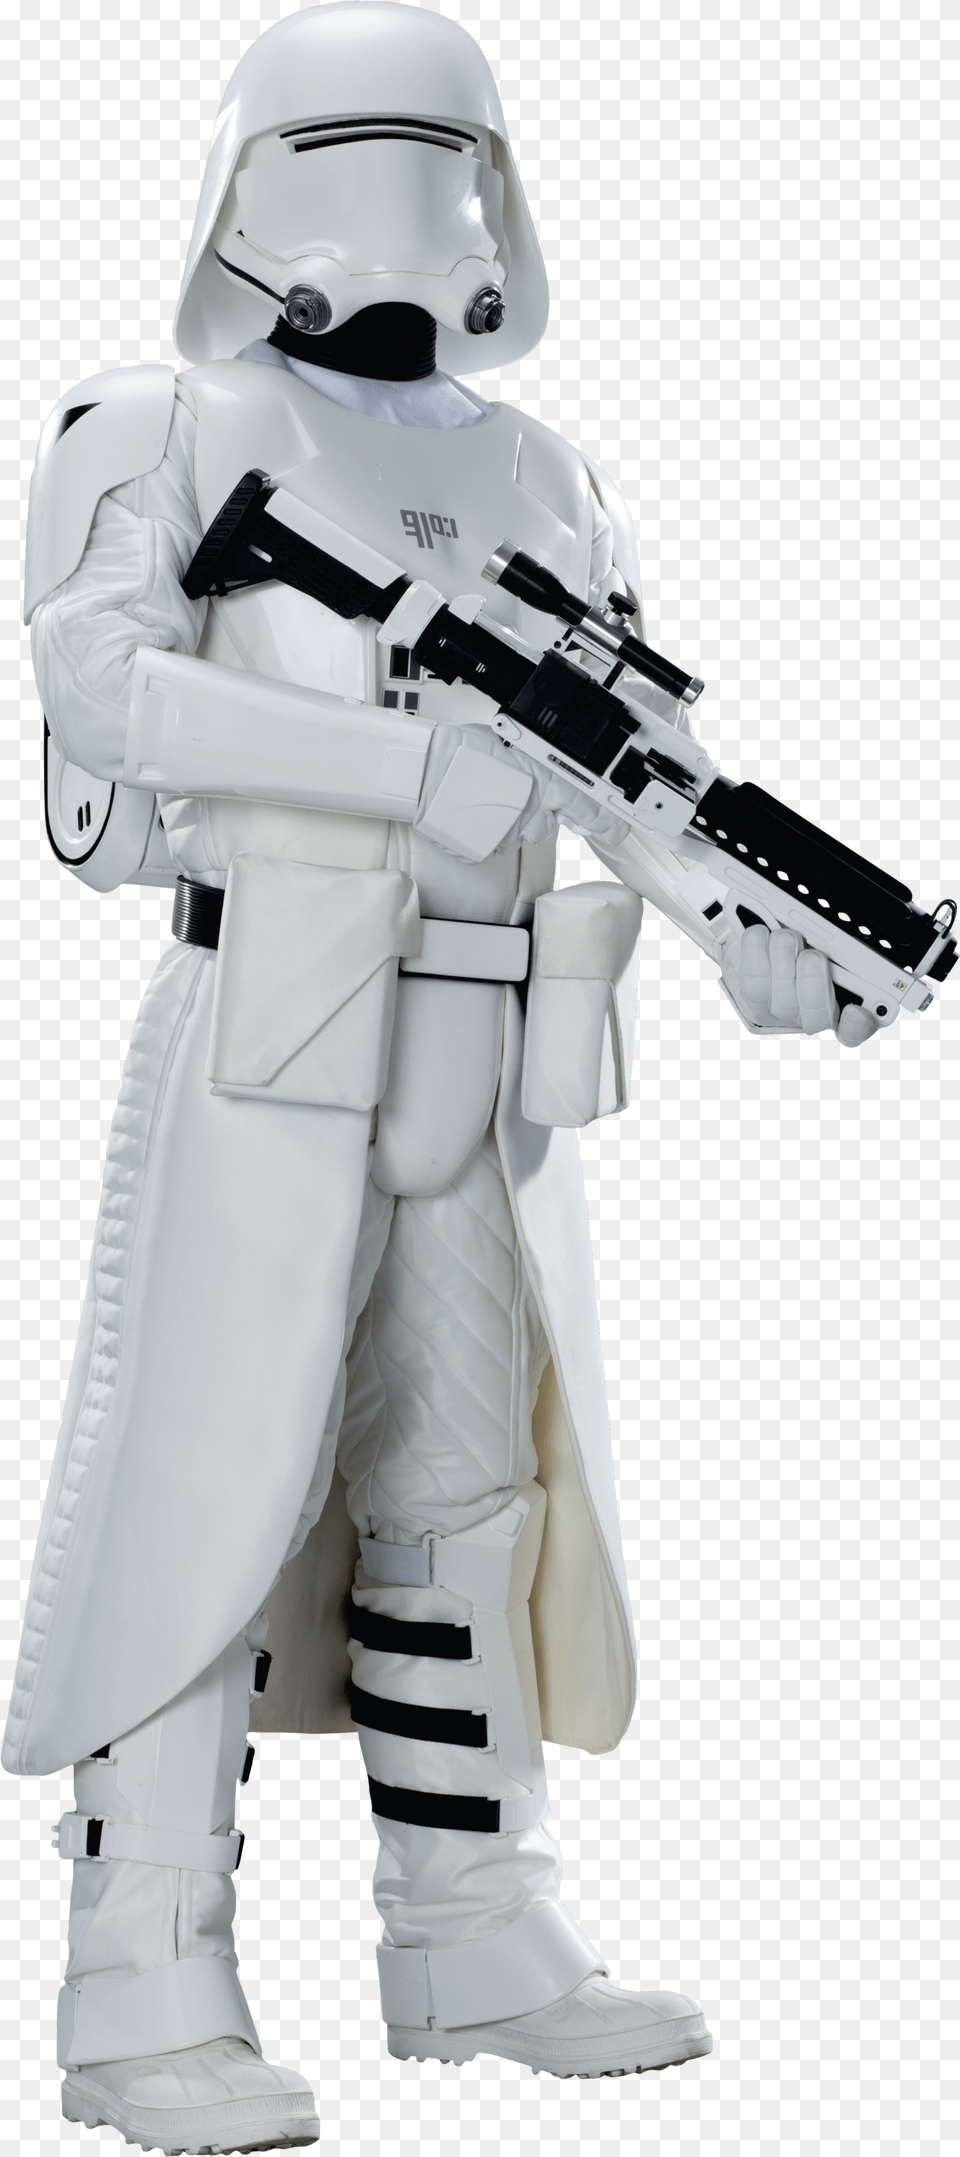 Premium Eras Canon Starwars Characters Cut Outs Png Image